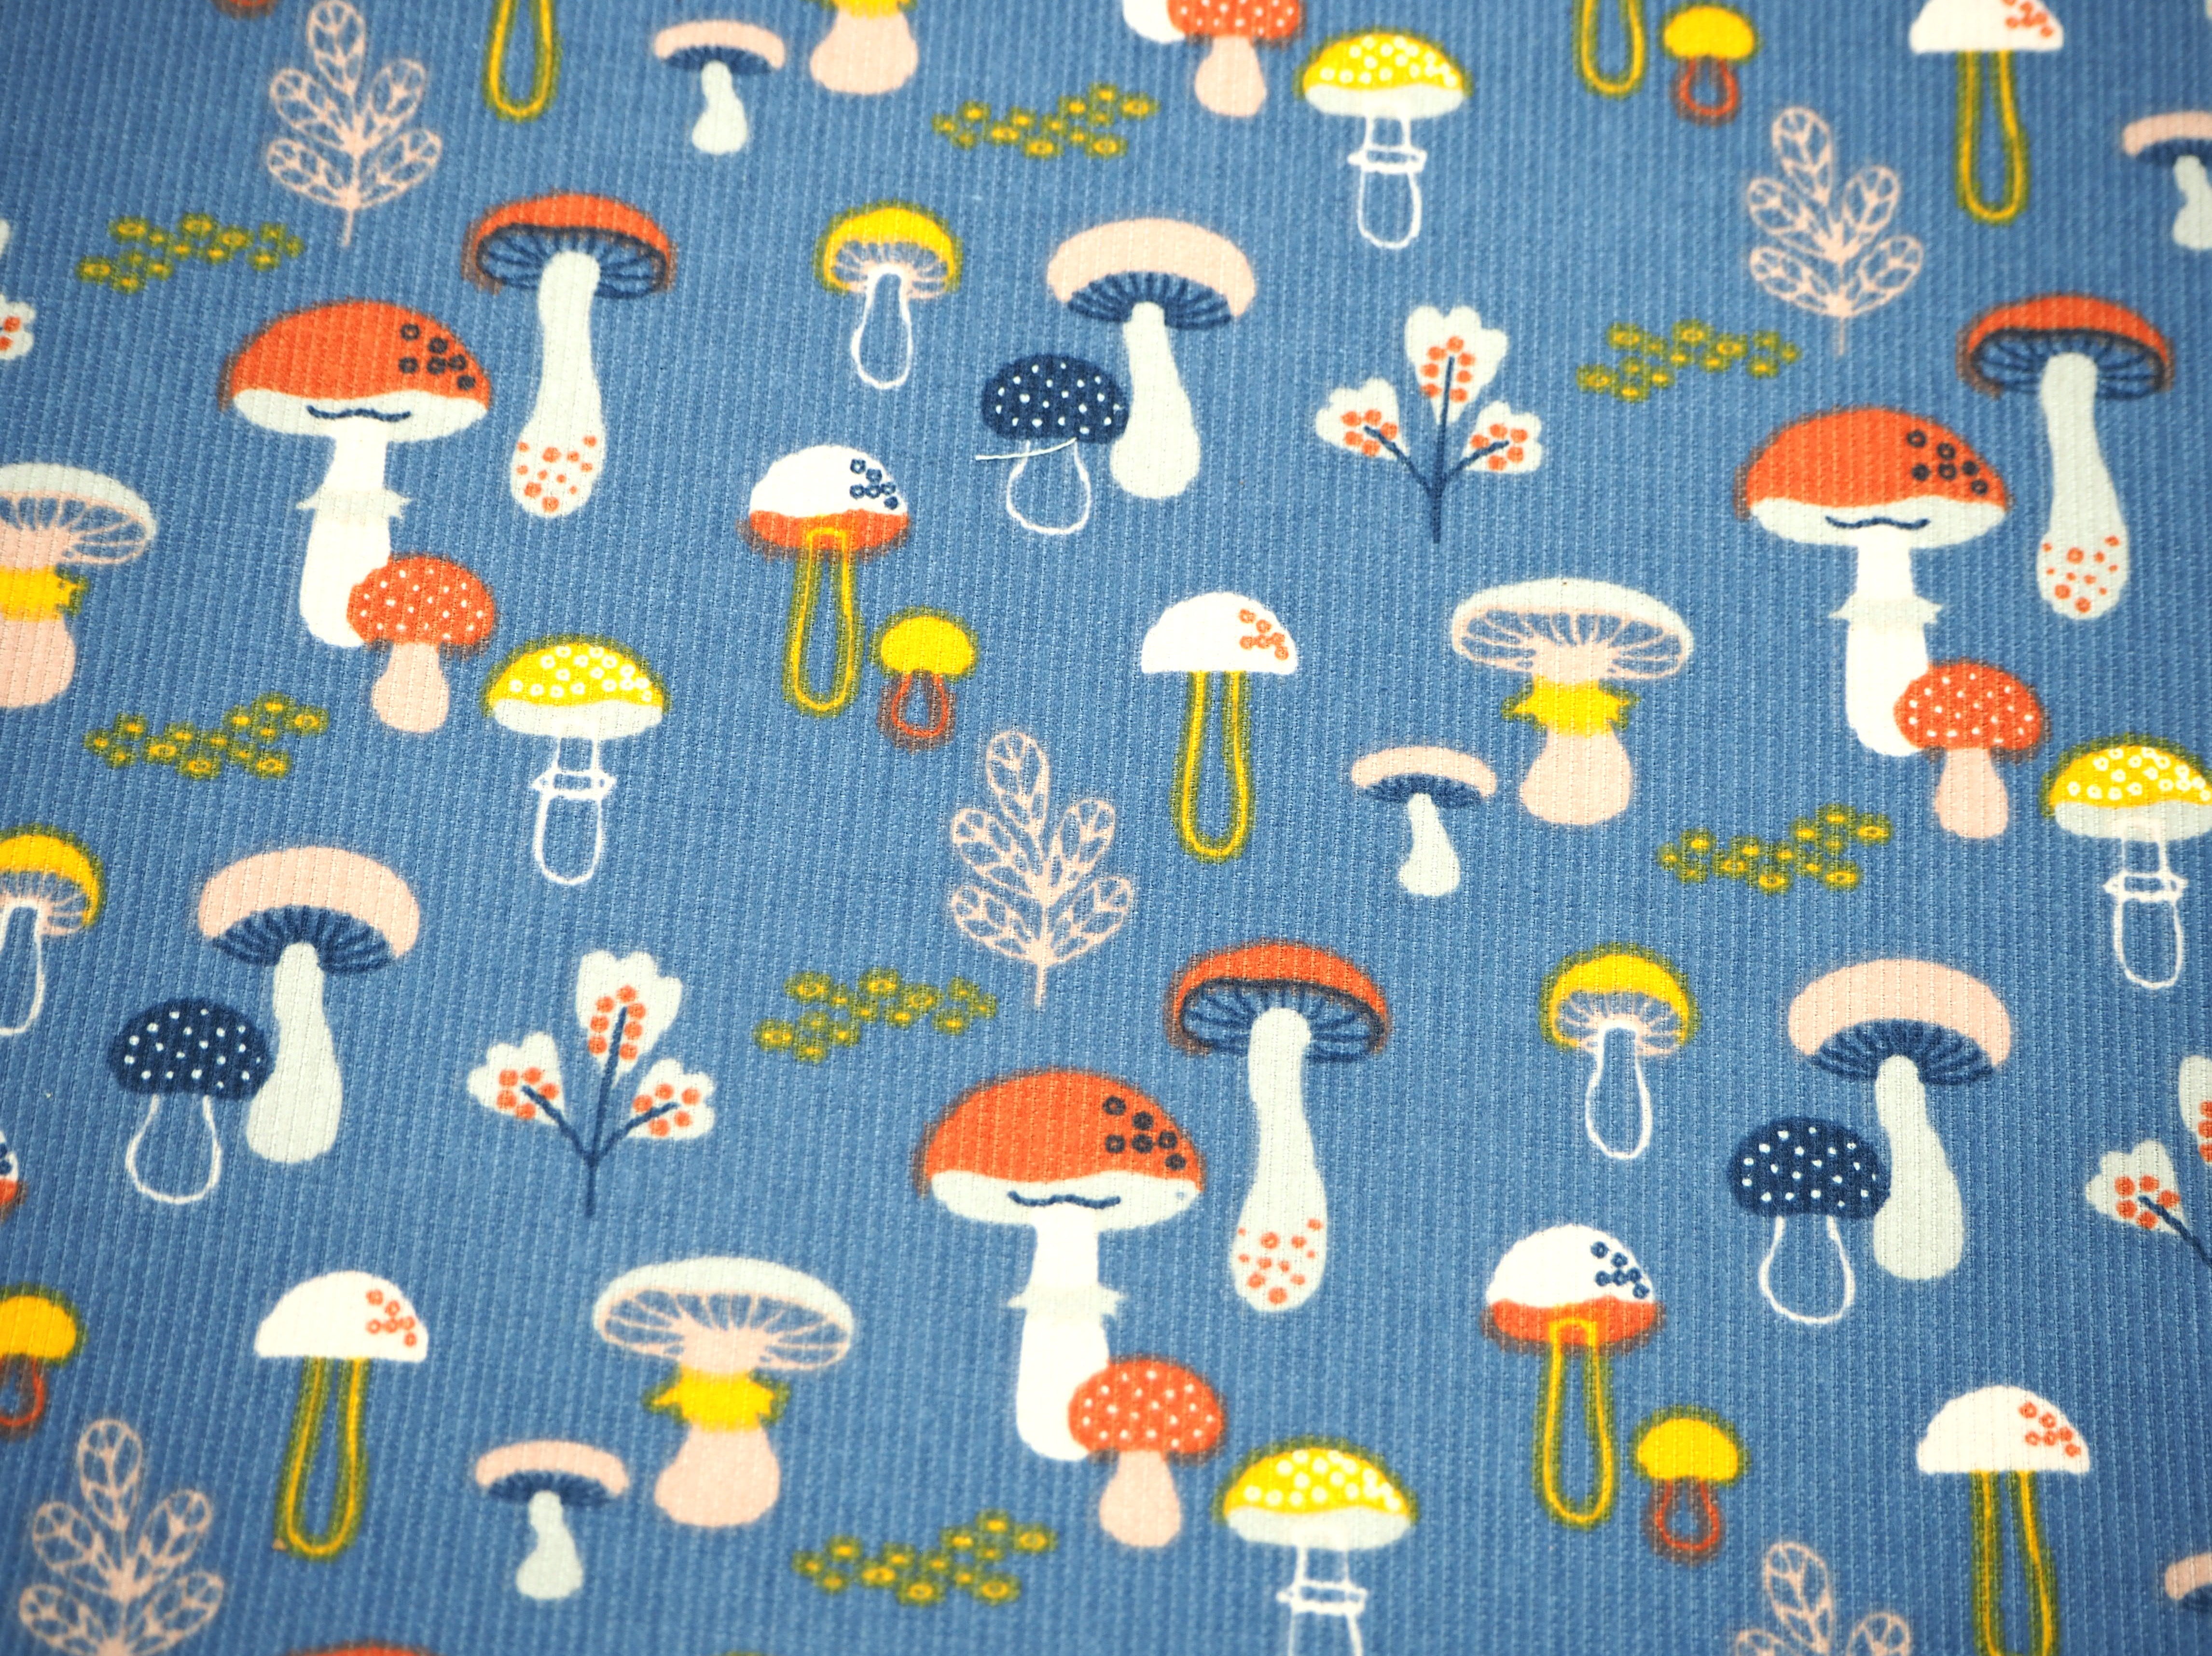 Fabric view of A Sack Of Wheat, featuring cute, colorful mushrooms on blue corduroy 100% cotton fabric